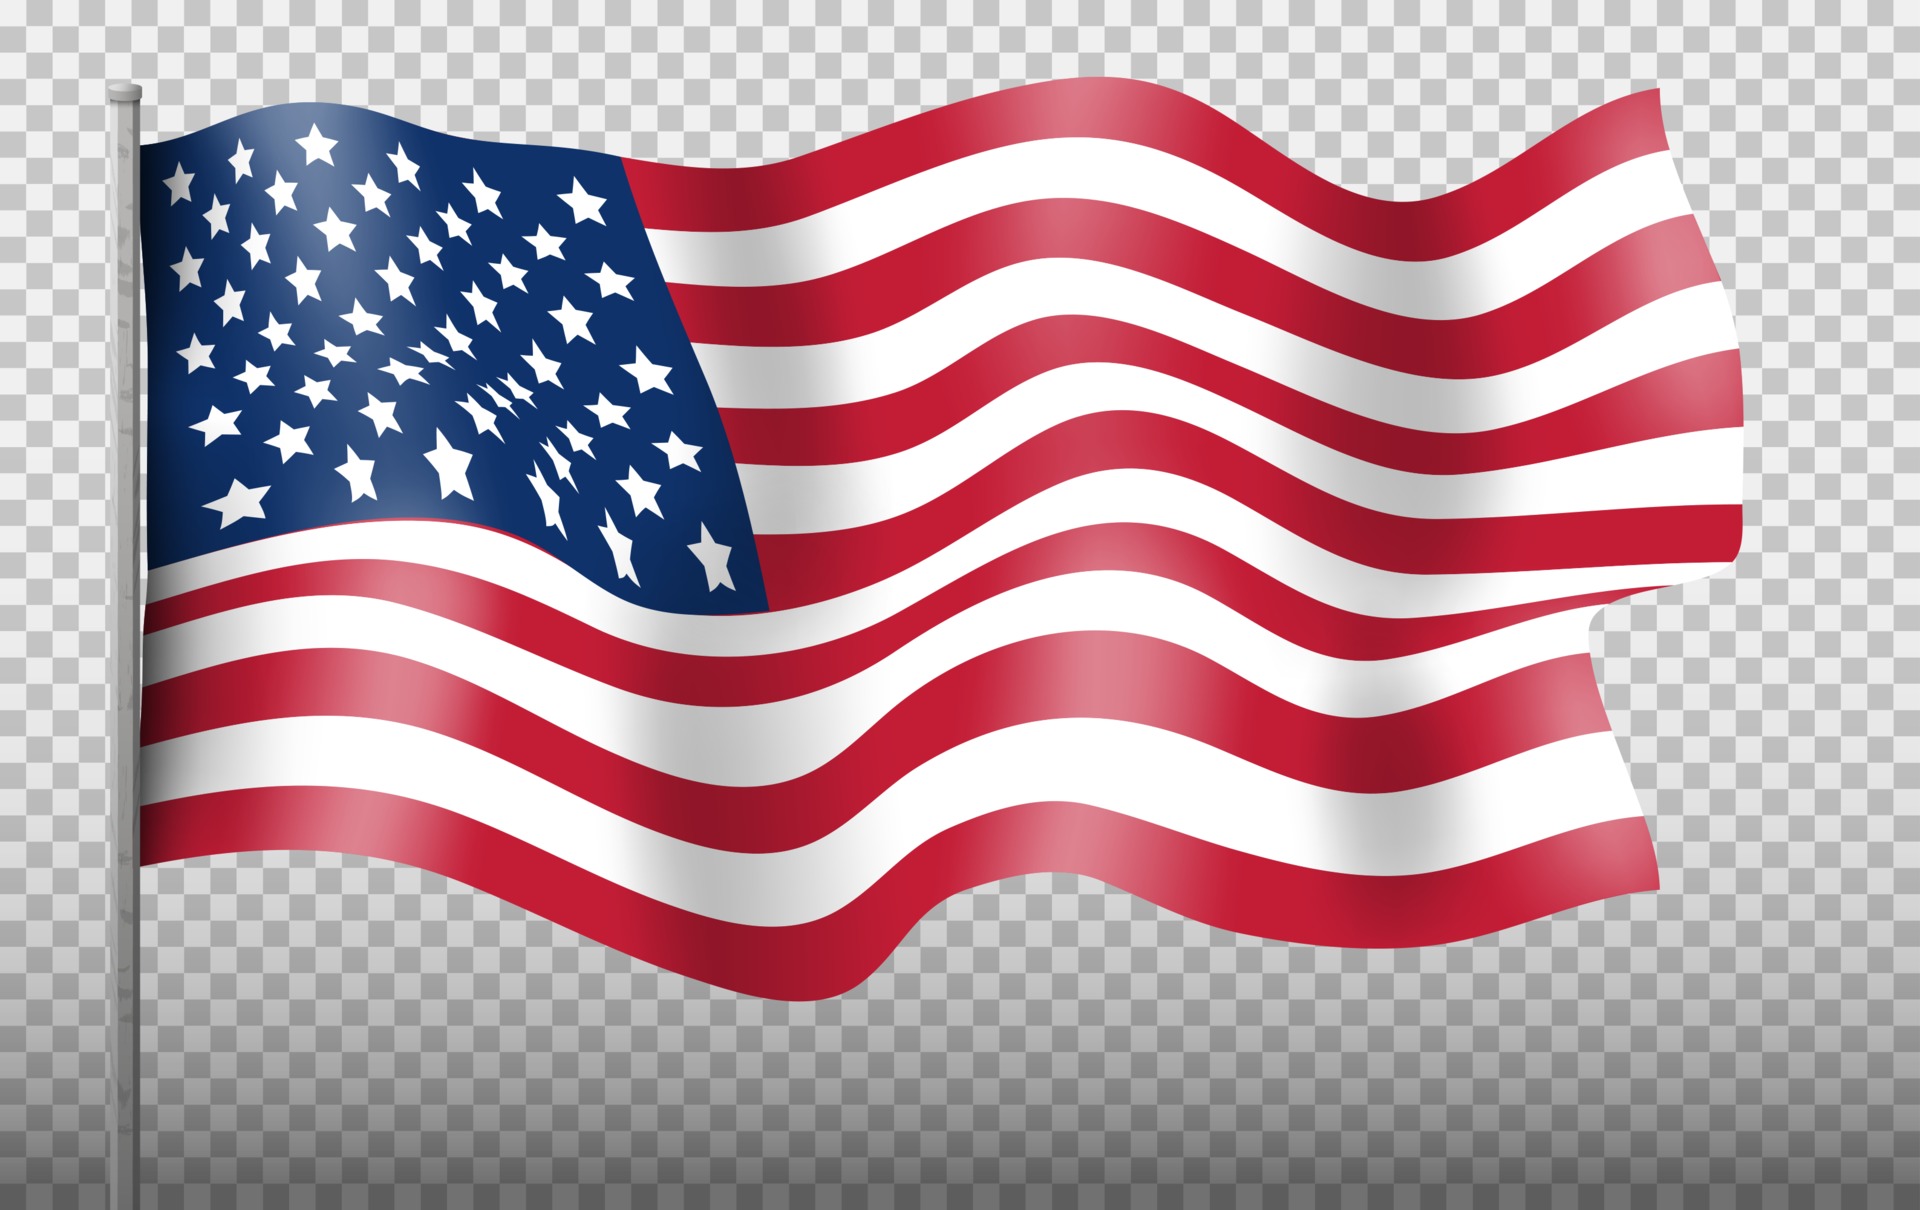 Waving Flag Of The United States Of America On Transparent Background